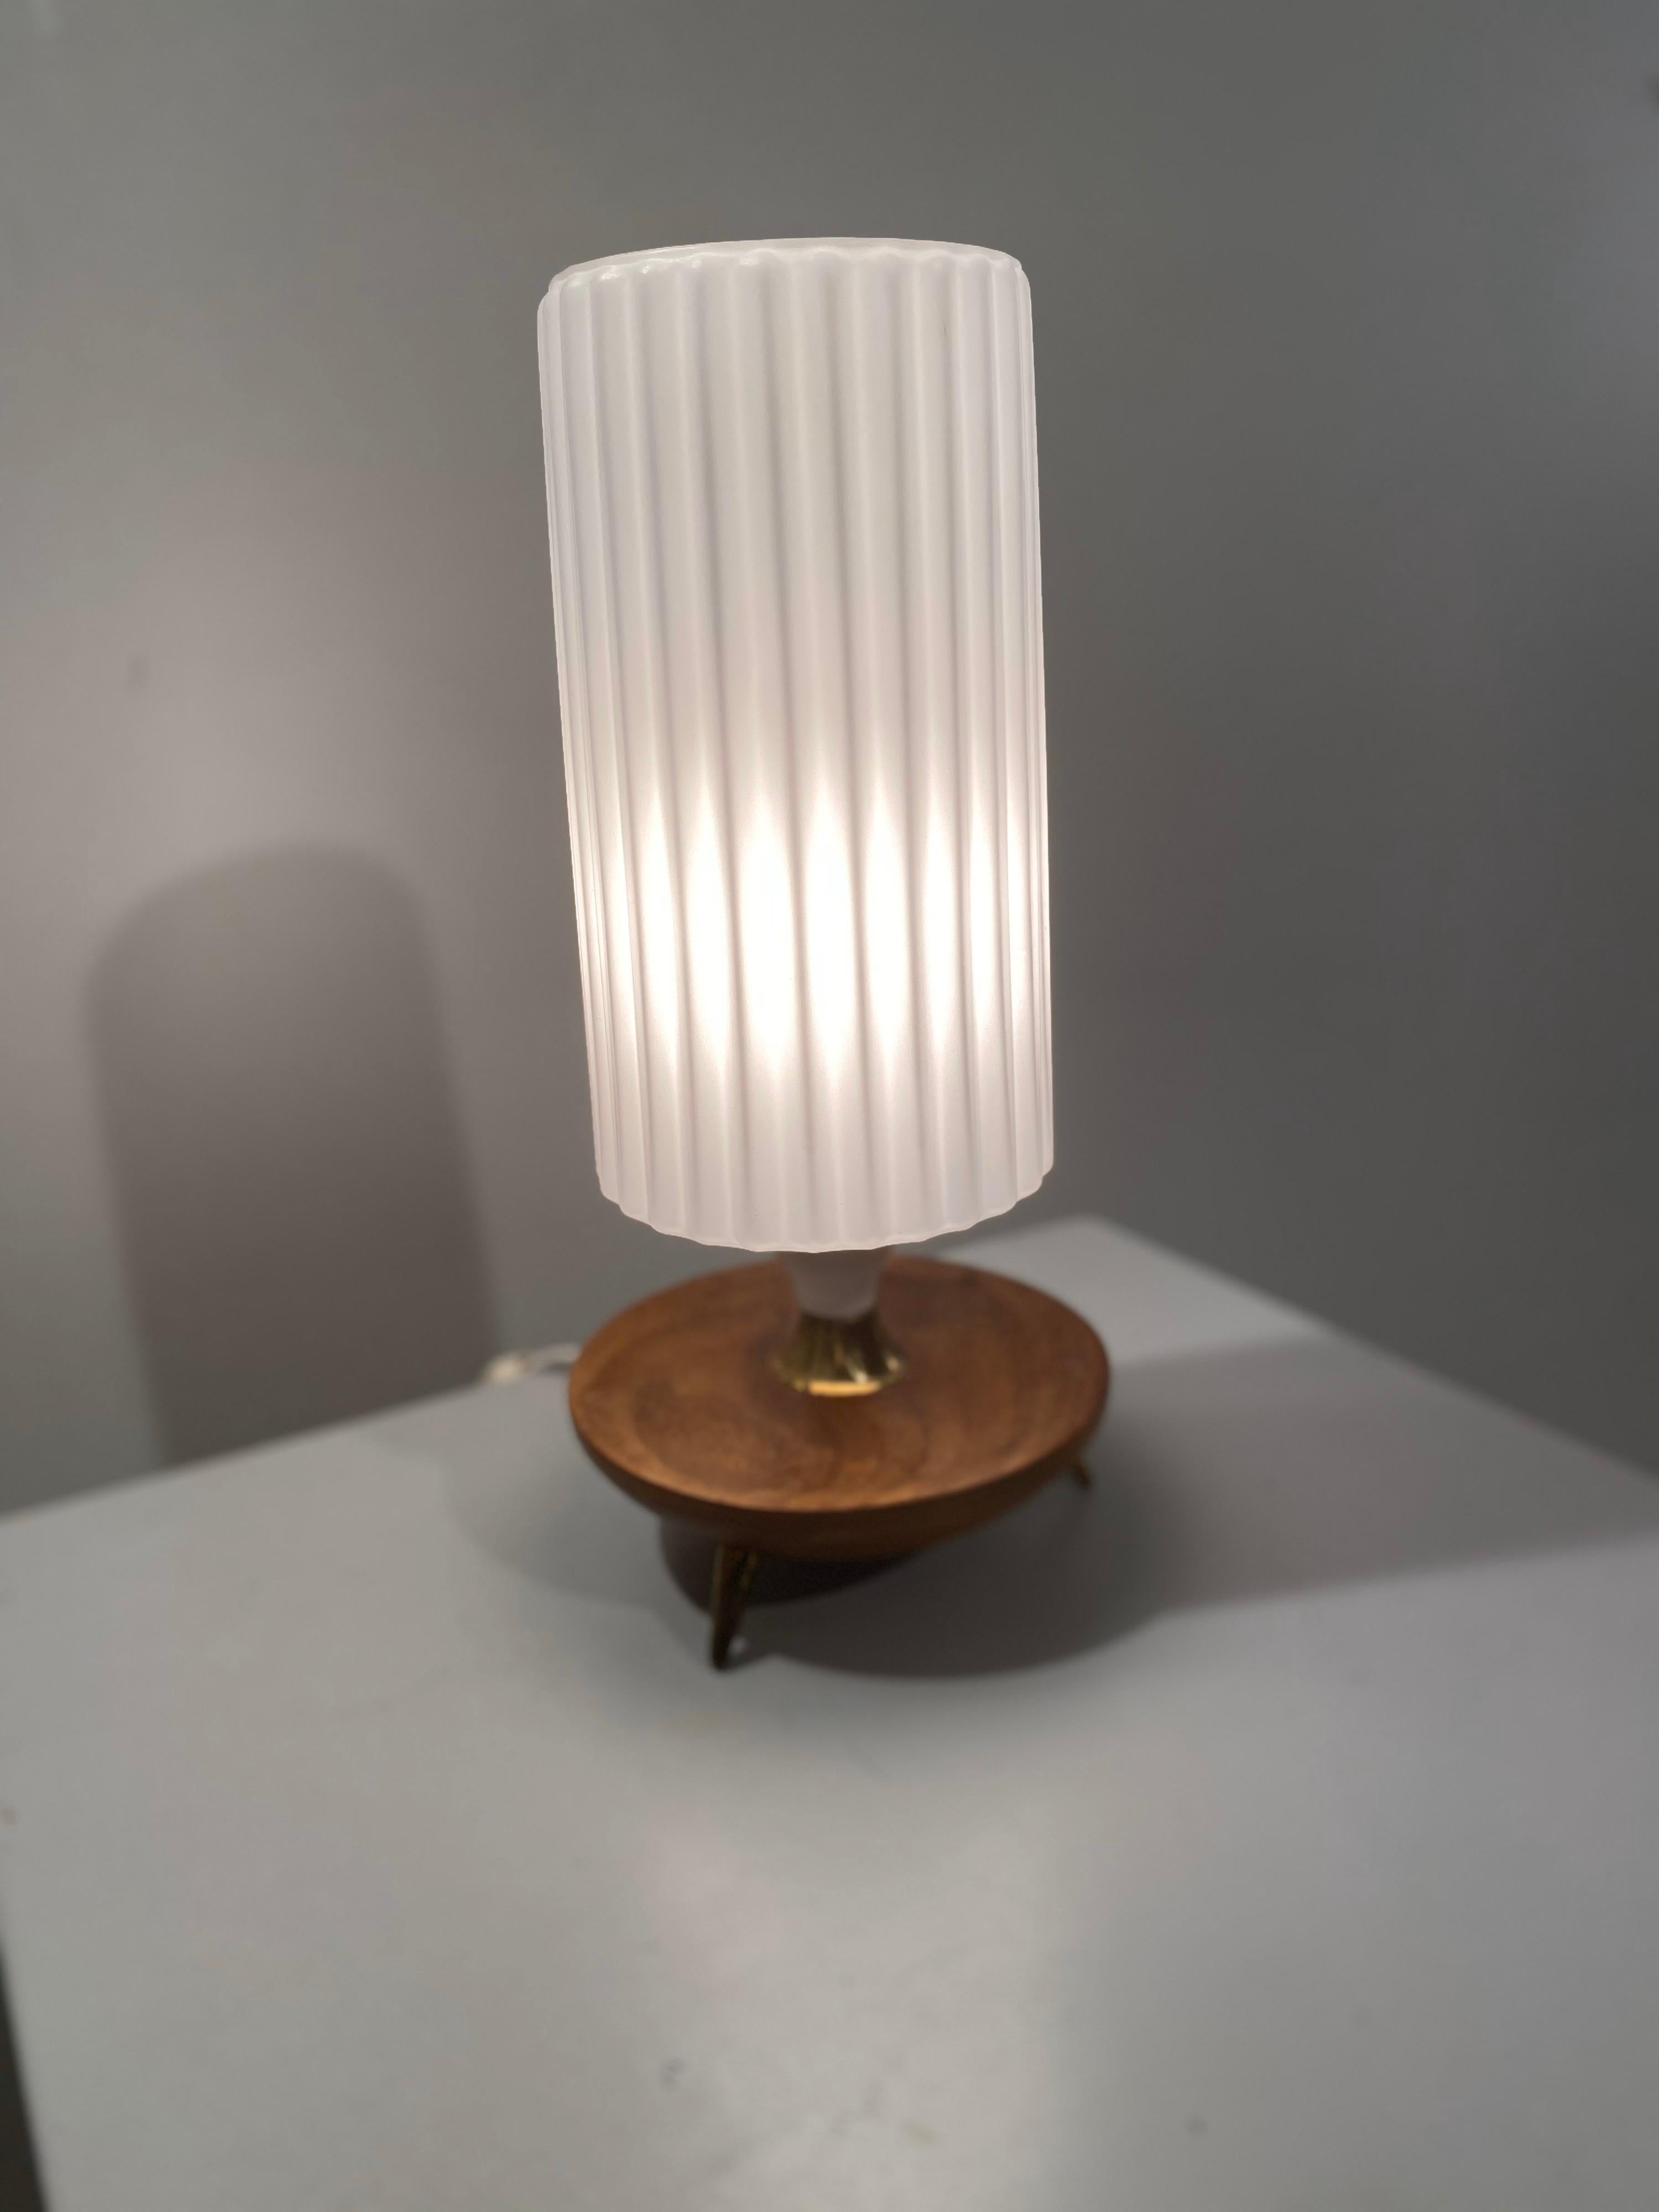 Beautiful rare desk lamp by Louis Kalff for Philips. A rugged milk glass shade fitted on a wood base with 3 copper legs and copper detailing.